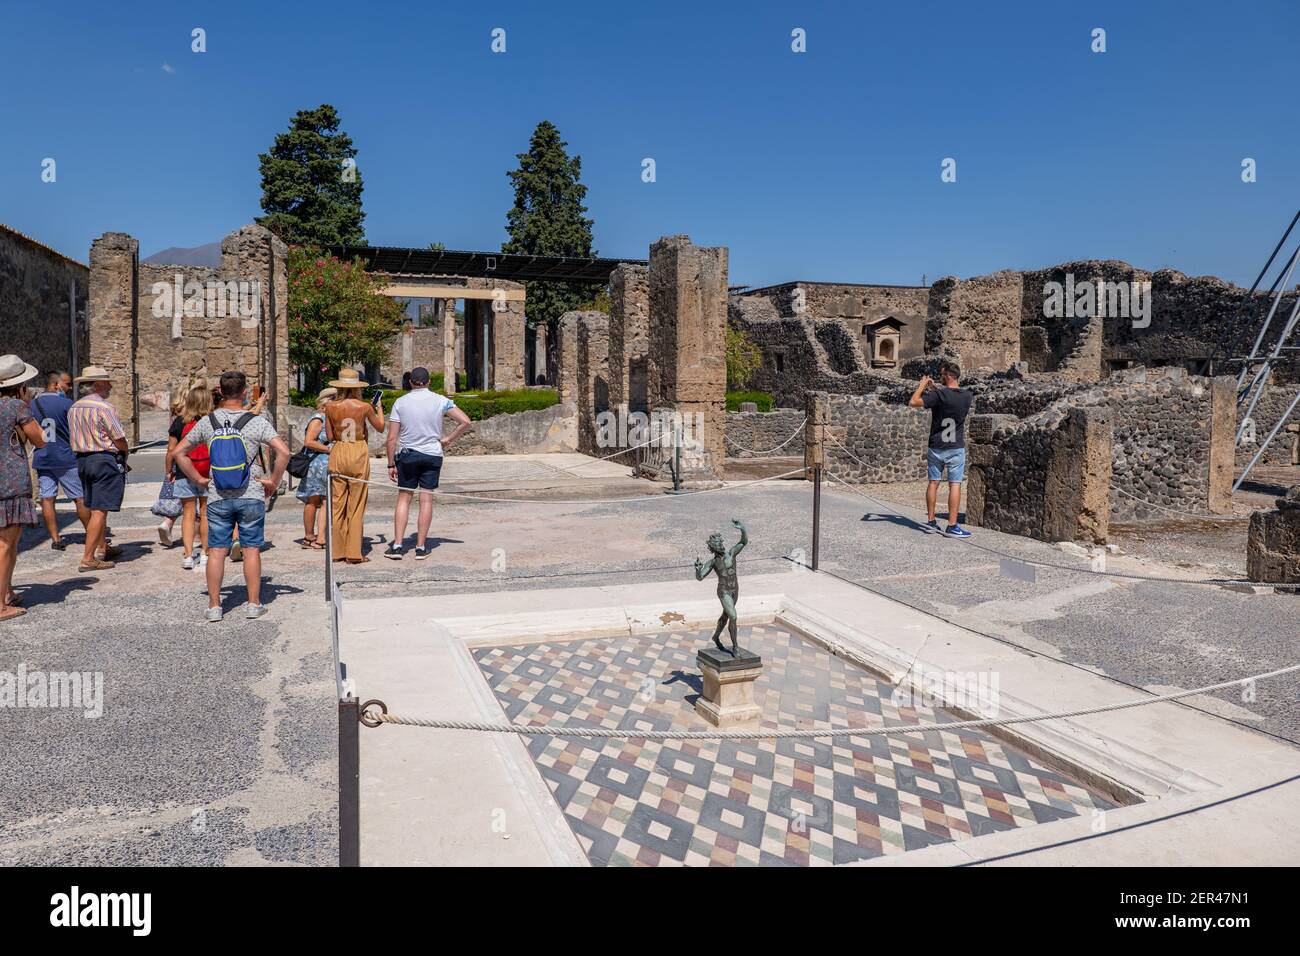 House of the Faun (Italian: Casa del Fauno) from 2nd century BC with dancing faun sculpture in impluvium, ancient Pompeii, Pompei, Italy Stock Photo